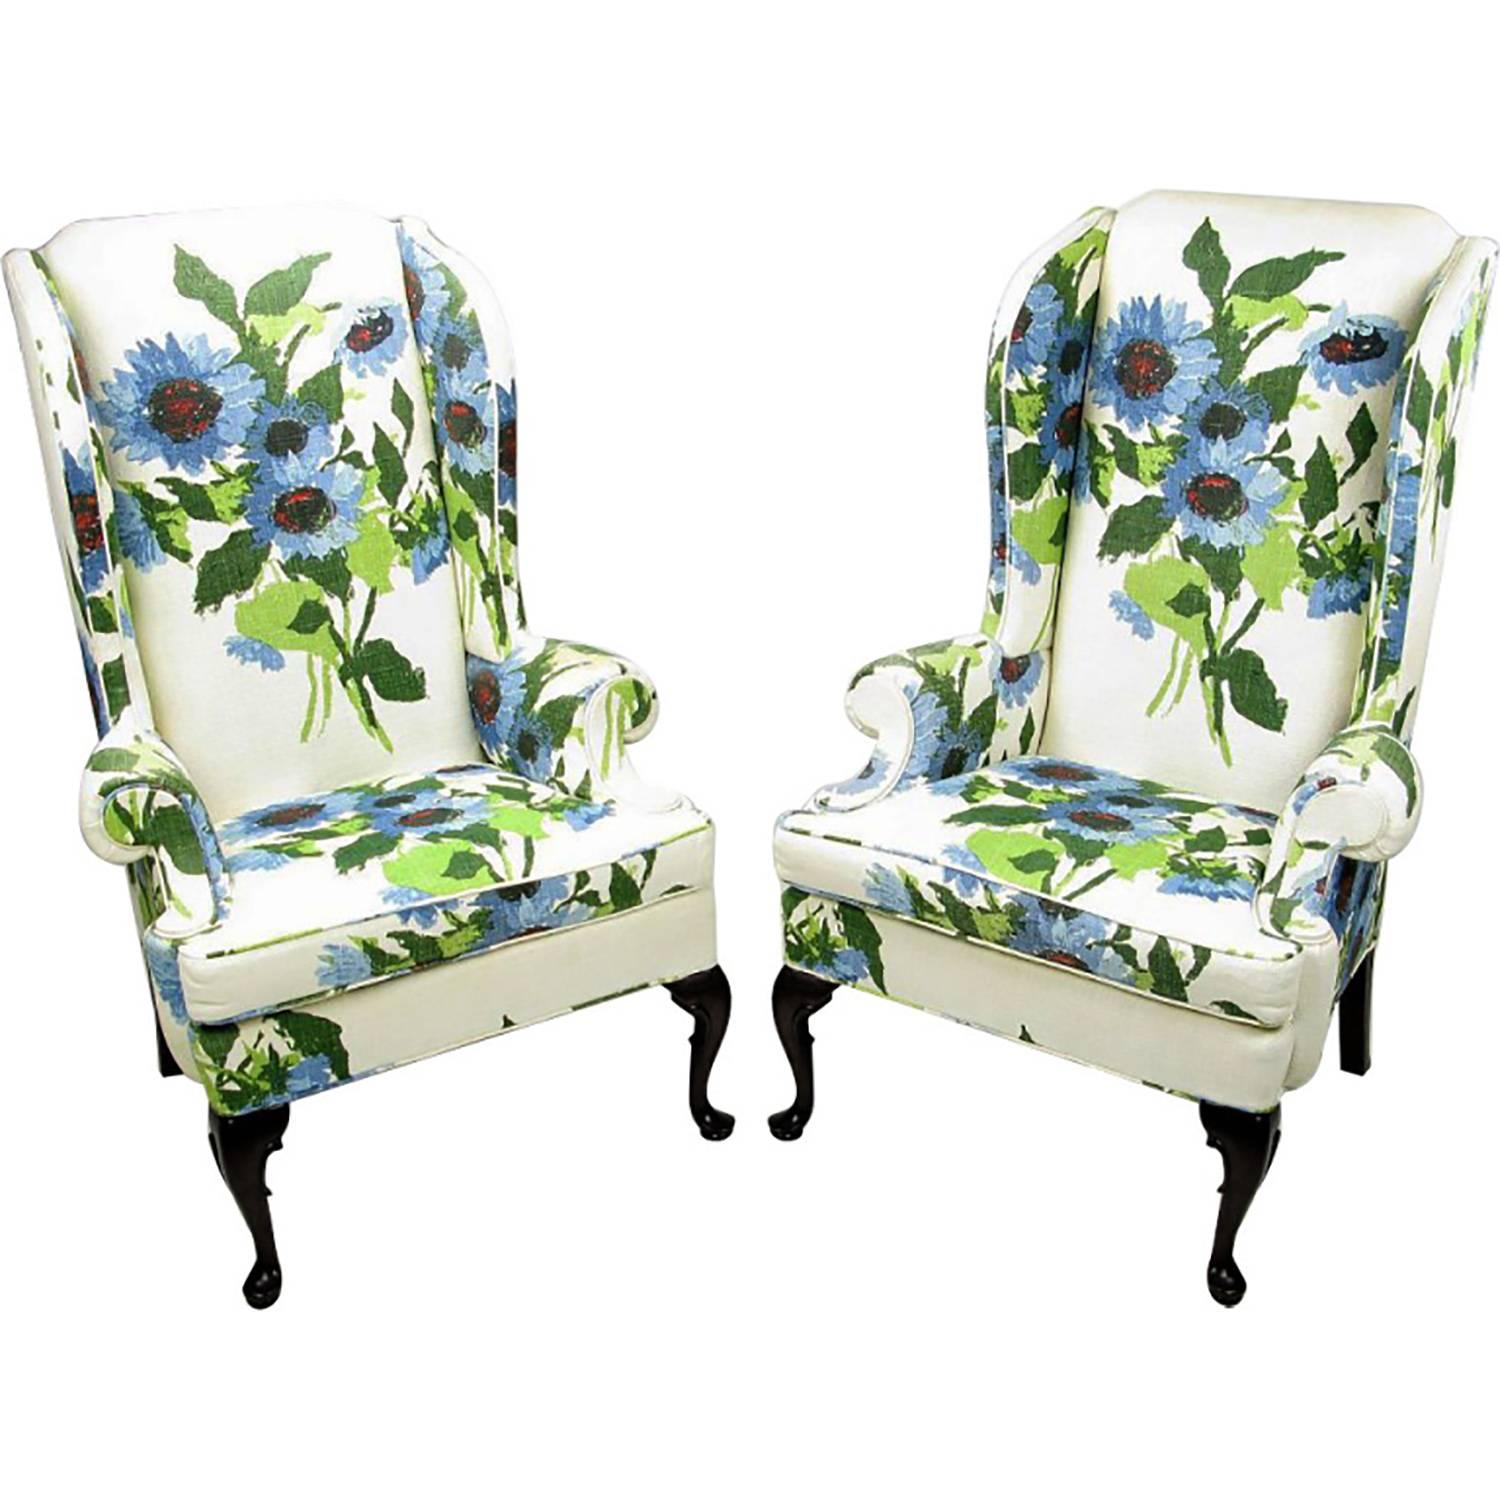 Pair of Elegant and Bold Floral Linen Upholstered Wing Chairs by Hickory Chair